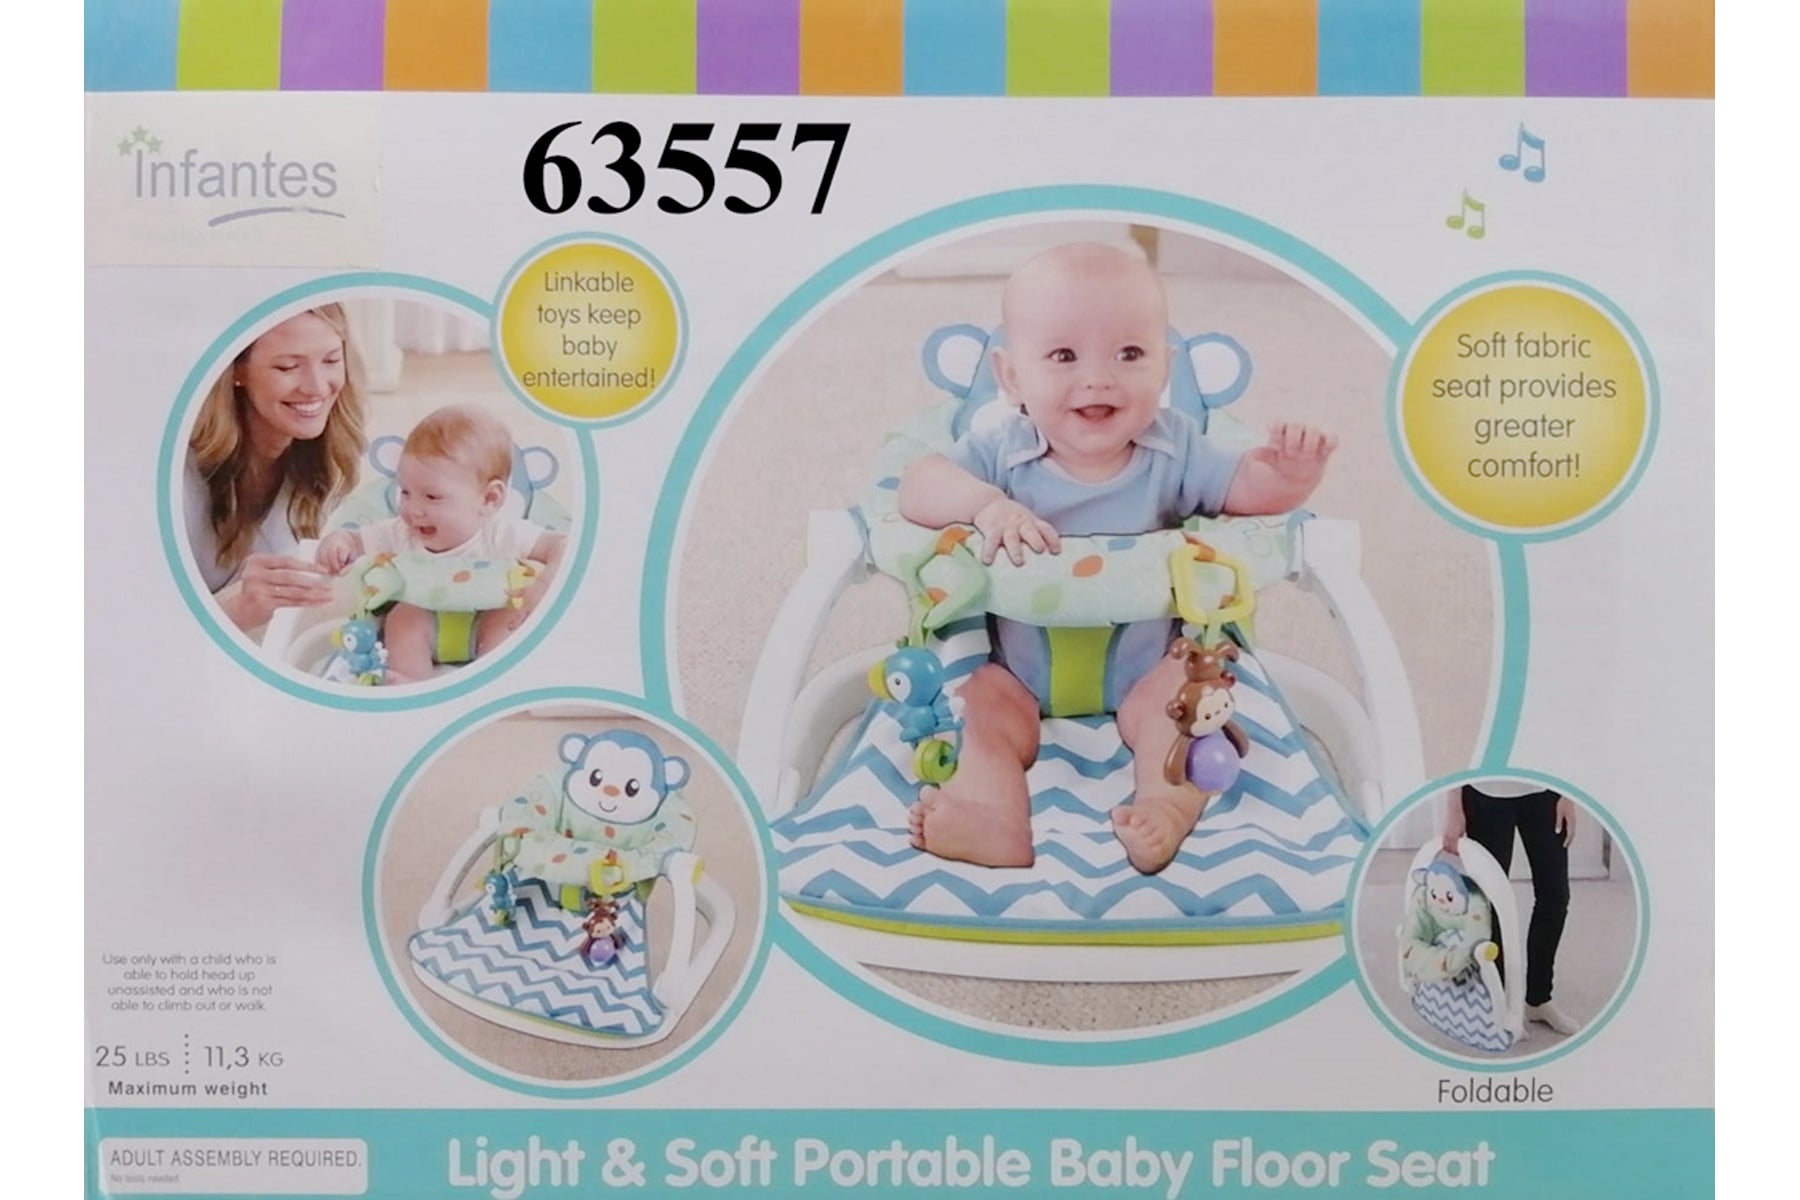 Infantes Baby Portable Soft Floor Seat - 63557